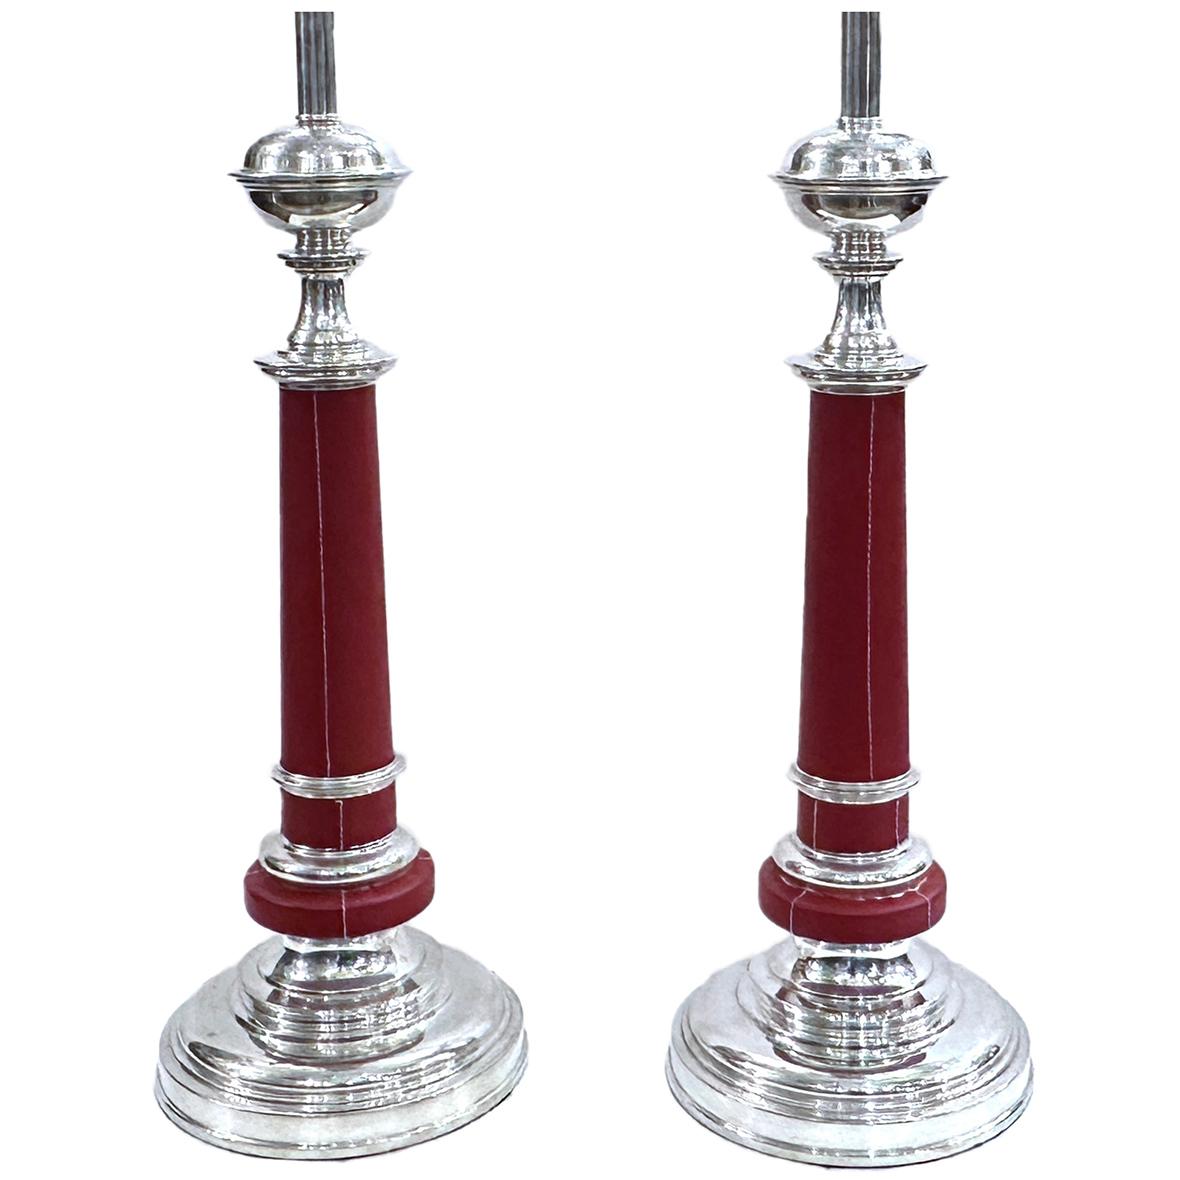 Pair of French circa 1950's silver plated lamps with red leather bodies.

Measurements:
Height of body: 24